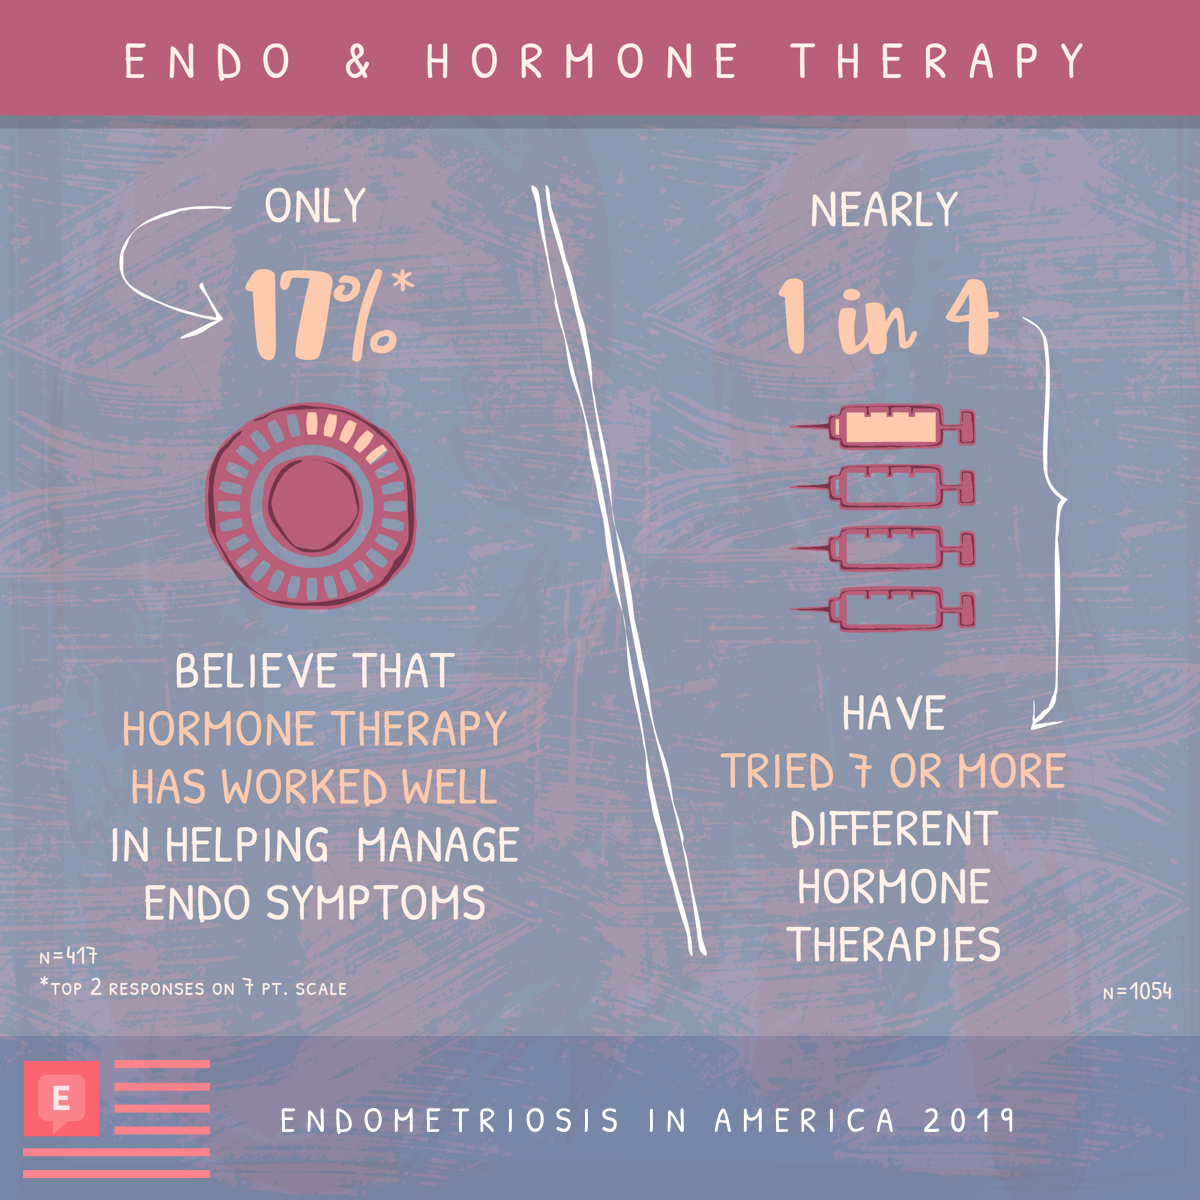 17% believe that hormone therapy has worked well for endo symptoms. 1 in 4 have tried 7 or more hormone therapies.